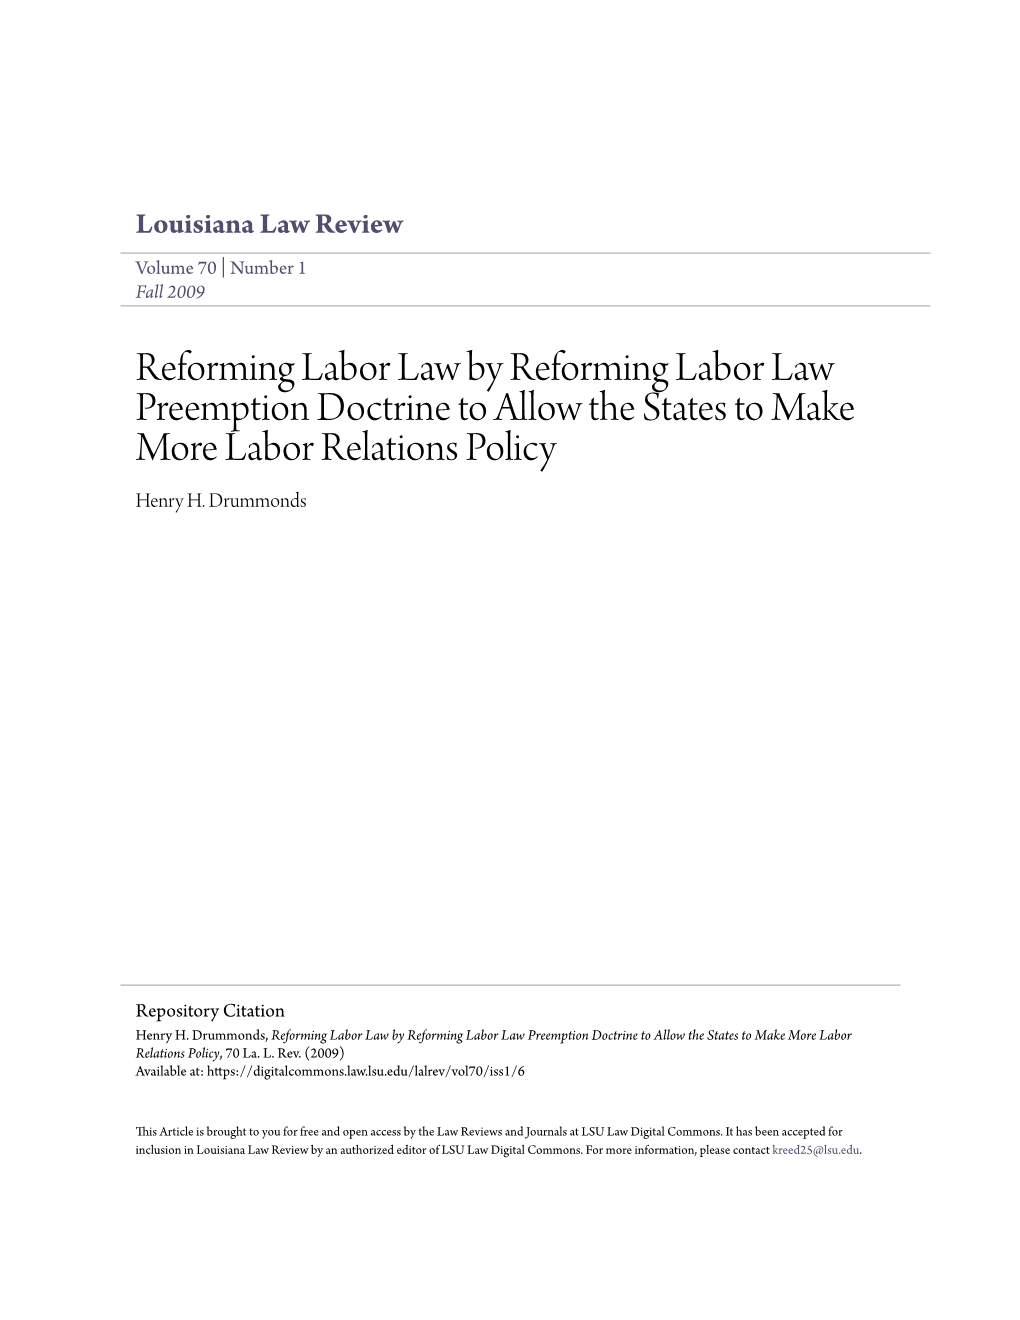 Reforming Labor Law by Reforming Labor Law Preemption Doctrine to Allow the States to Make More Labor Relations Policy Henry H